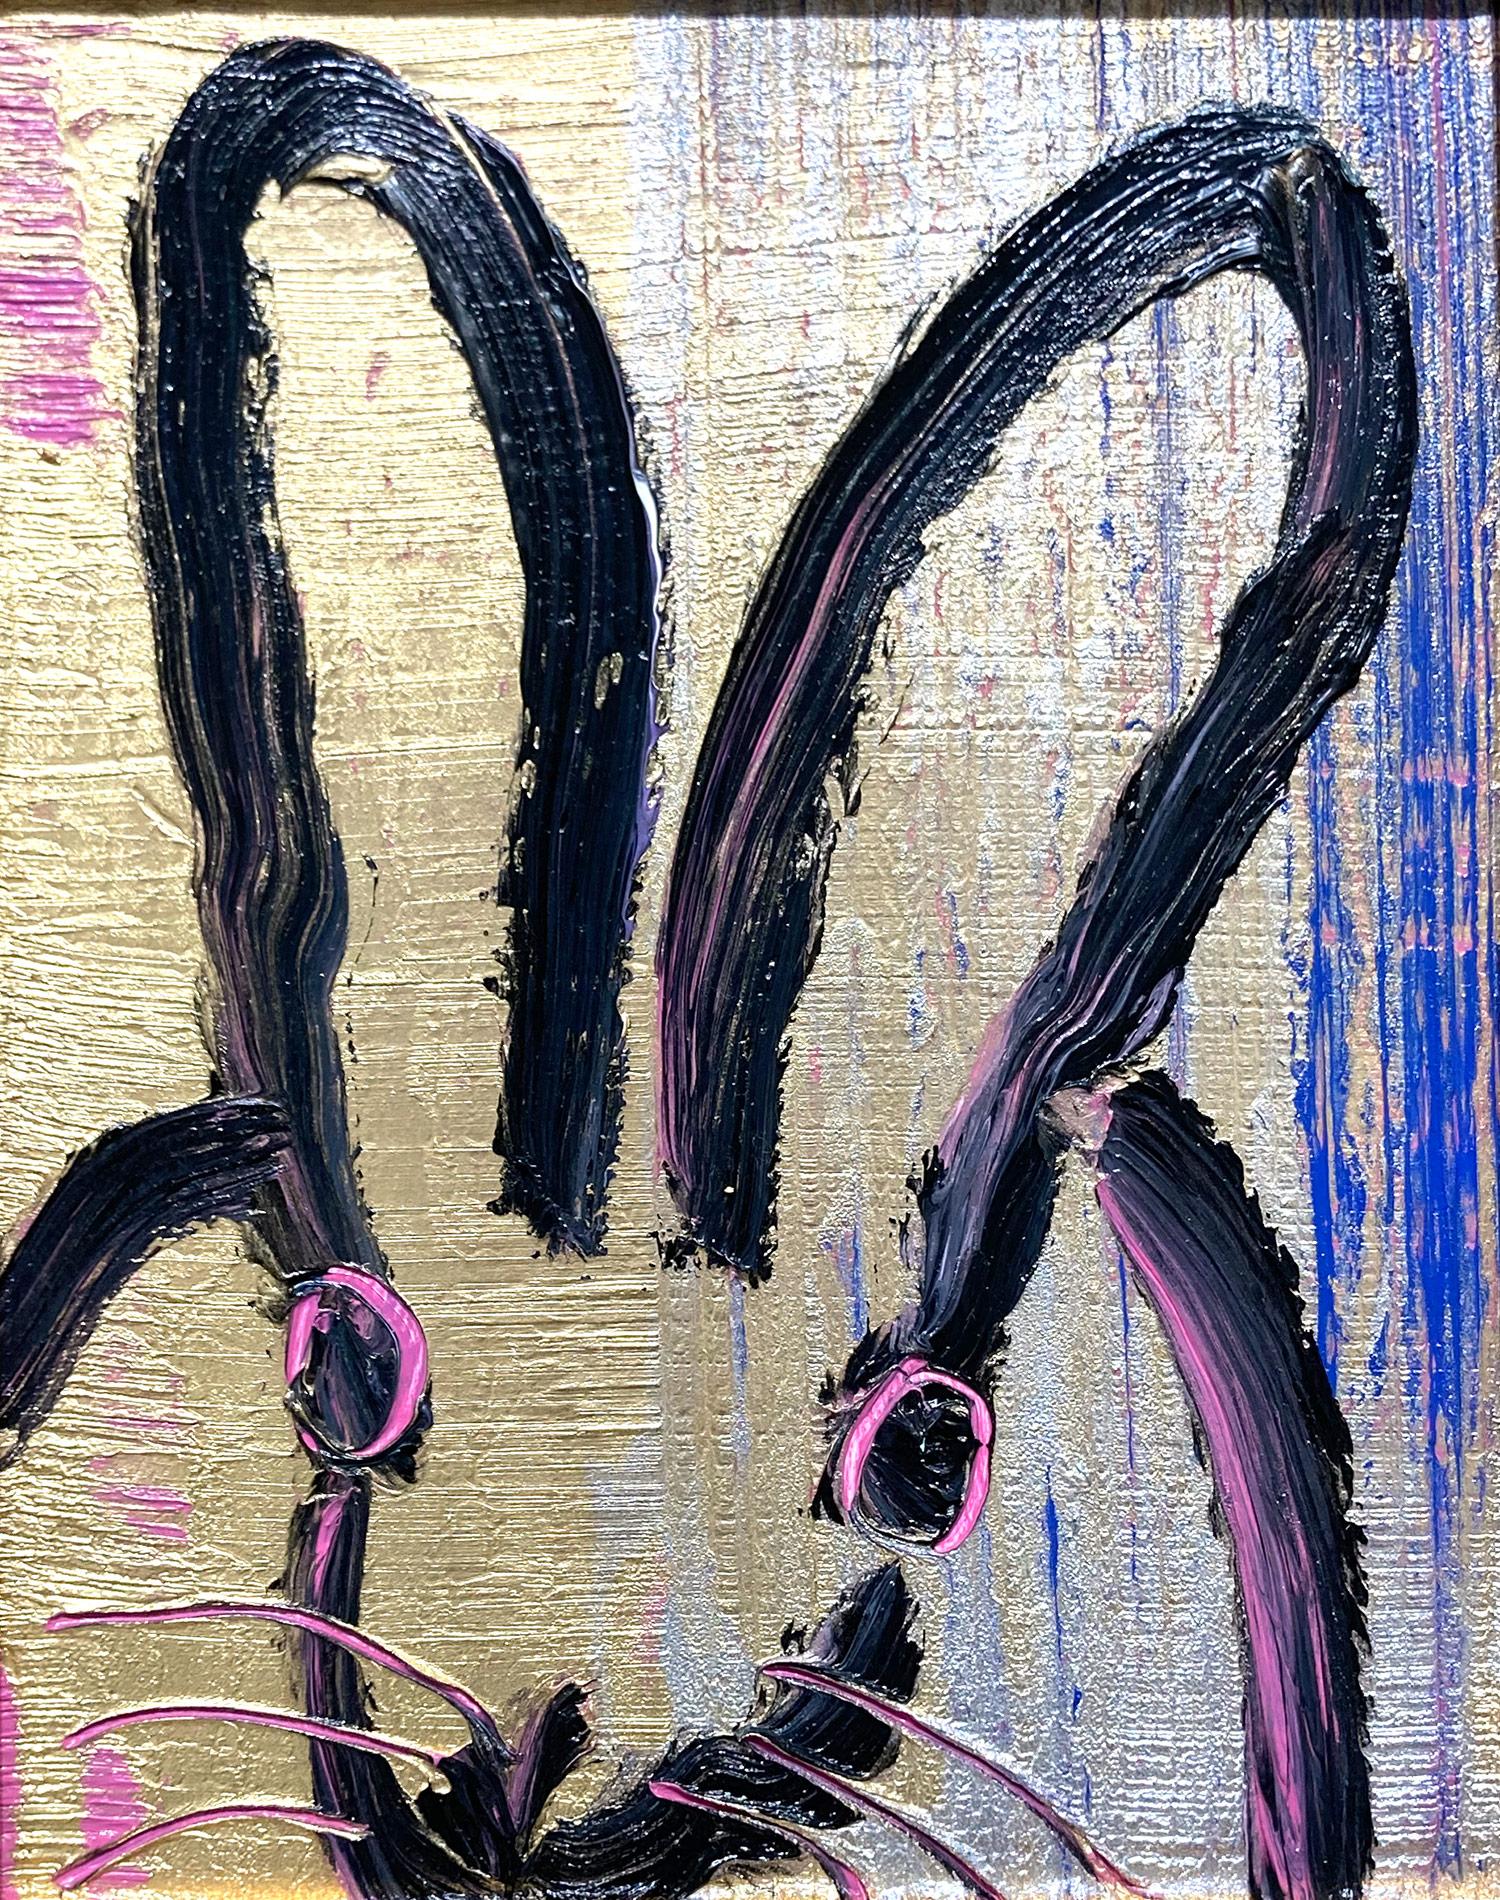 A wonderful composition of one of Slonem's most iconic subjects, Bunnies. This piece depicts a gestural figure of a black bunny on a multicolor metallic background with thick use of paint. Inspired by nature and a genuine love for animals, Slonem's